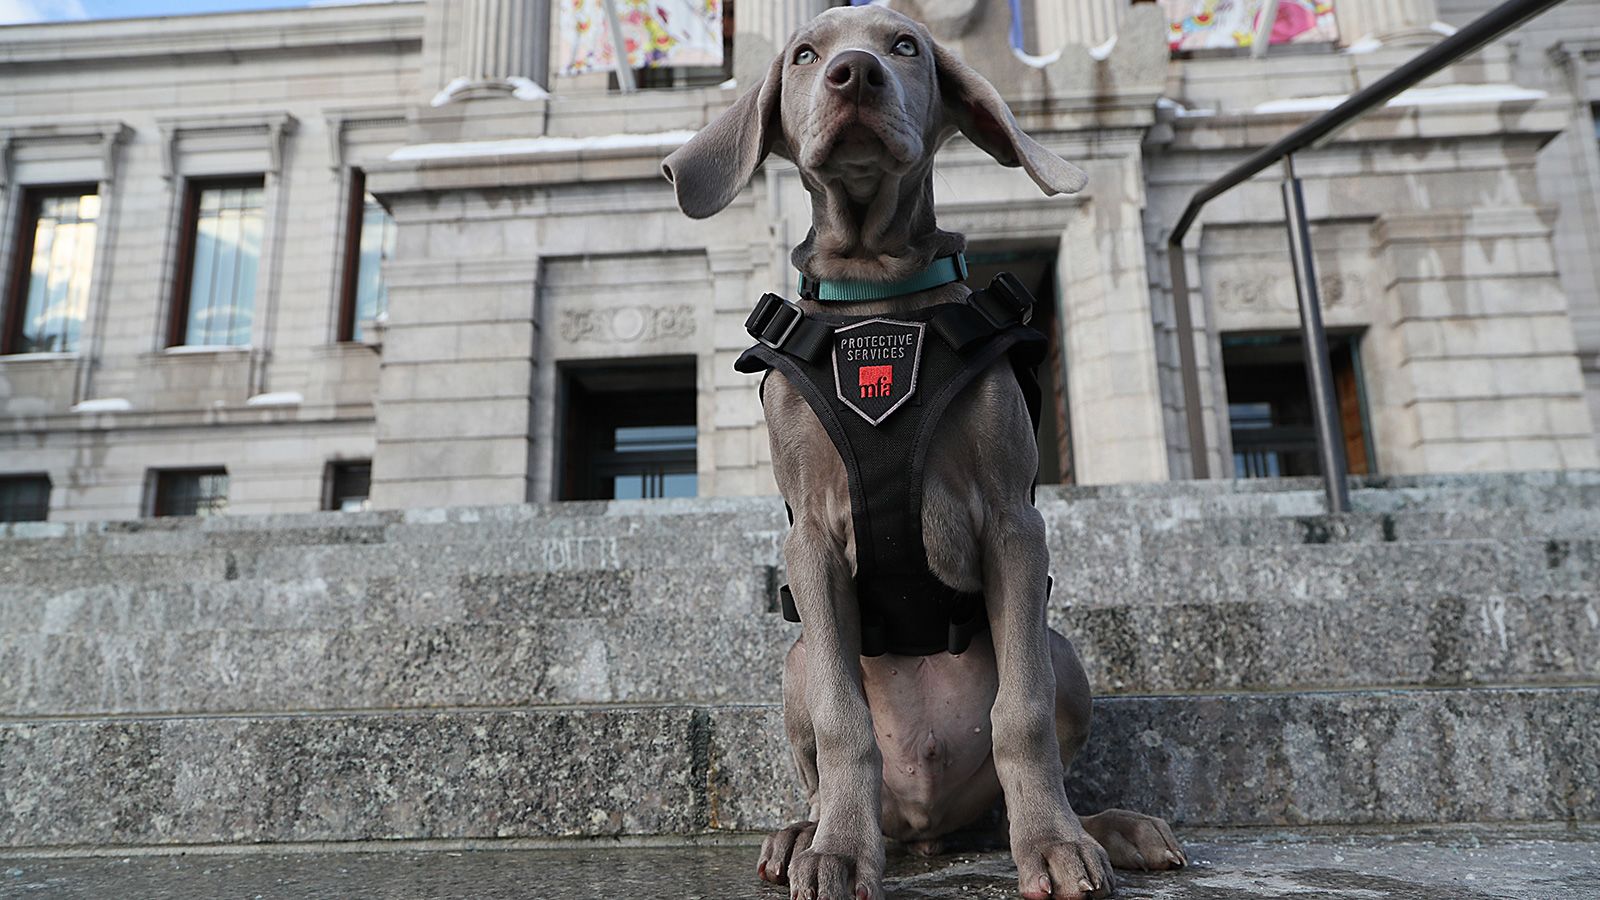 The Museum of Fine Arts in Boston, Massachusetts, also relies on the help of a four-legged friend. Pictured here in 2018 when he was 12 weeks old, <a href="index.php?page=&url=https%3A%2F%2Fwww.mfa.org%2Fabout%2Friley-the-museum-dog" target="_blank" target="_blank">Riley the Weimaraner </a>has been trained to detect everything from security threats to moths and other pests that pose a danger to the museum's collection.